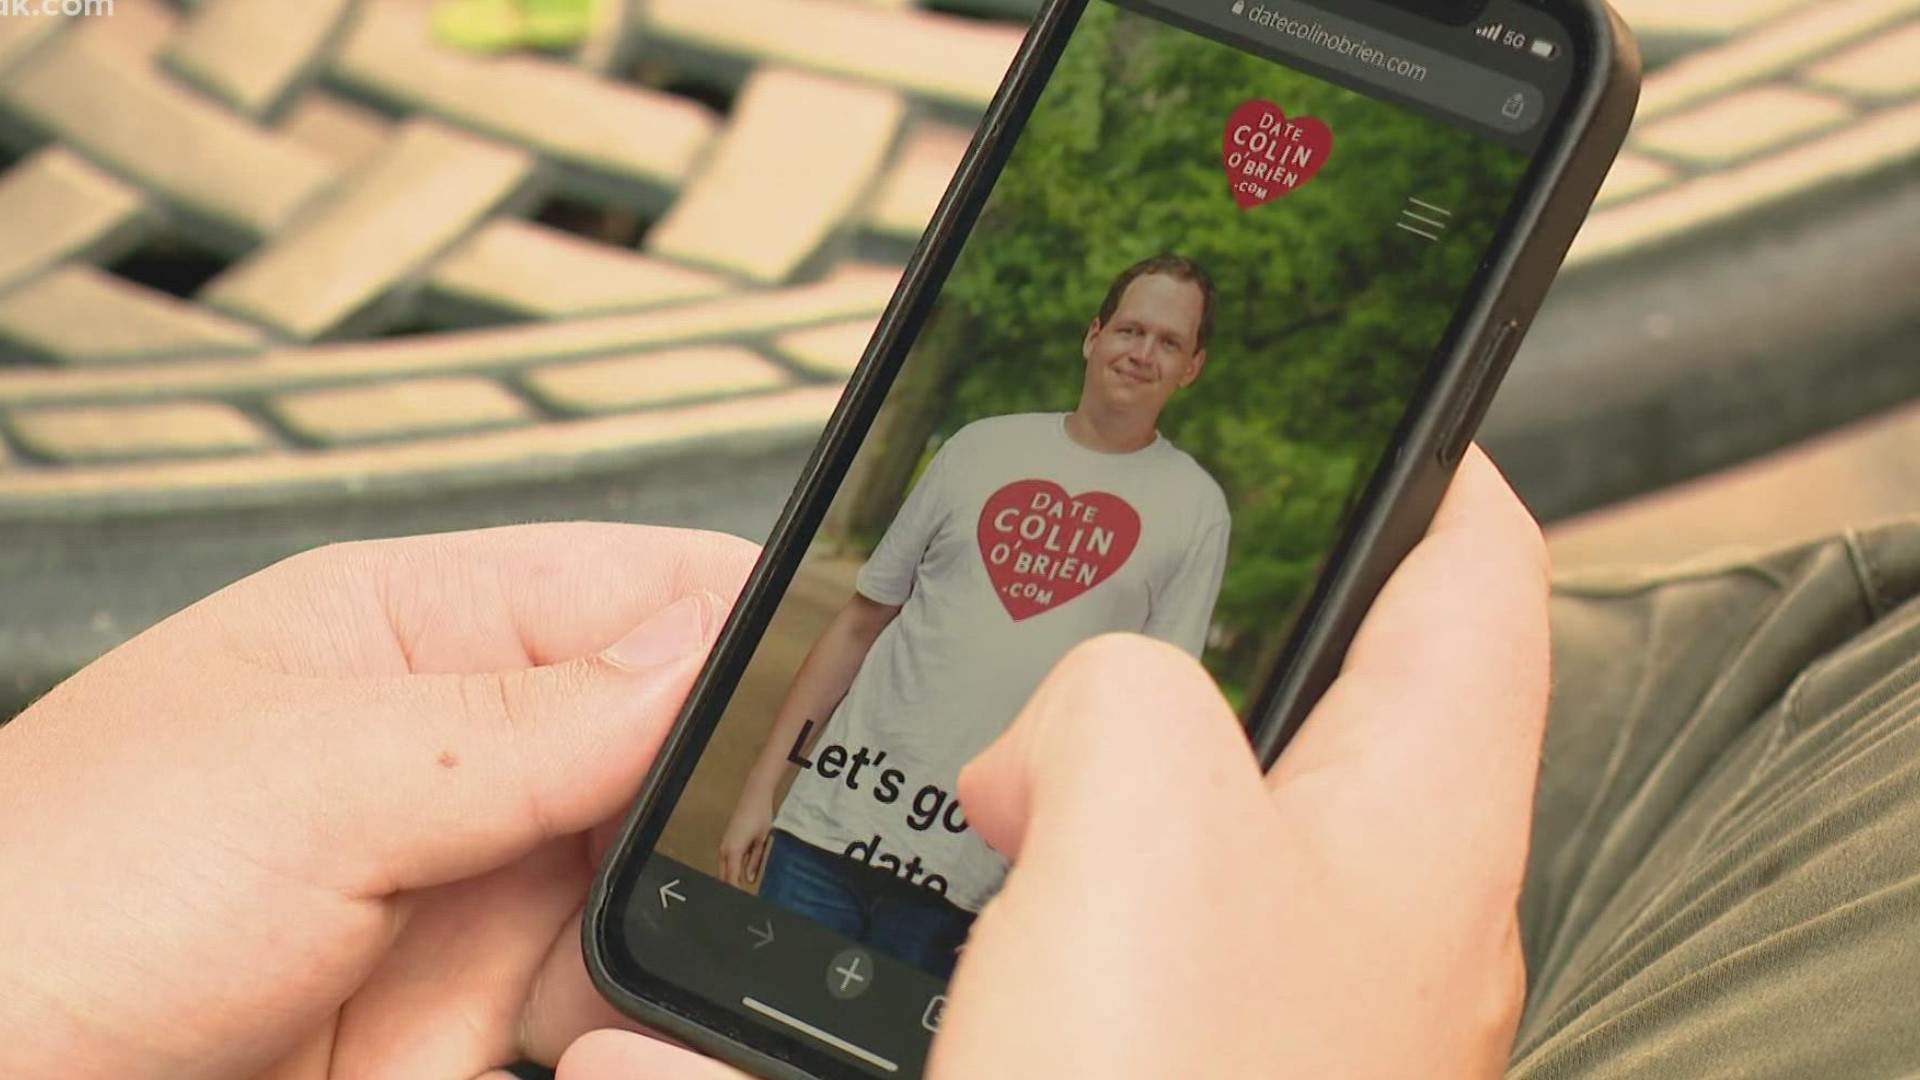 Colin O'Brien of St. Louis created a dating website that features himself as the sole eligible bachelor.